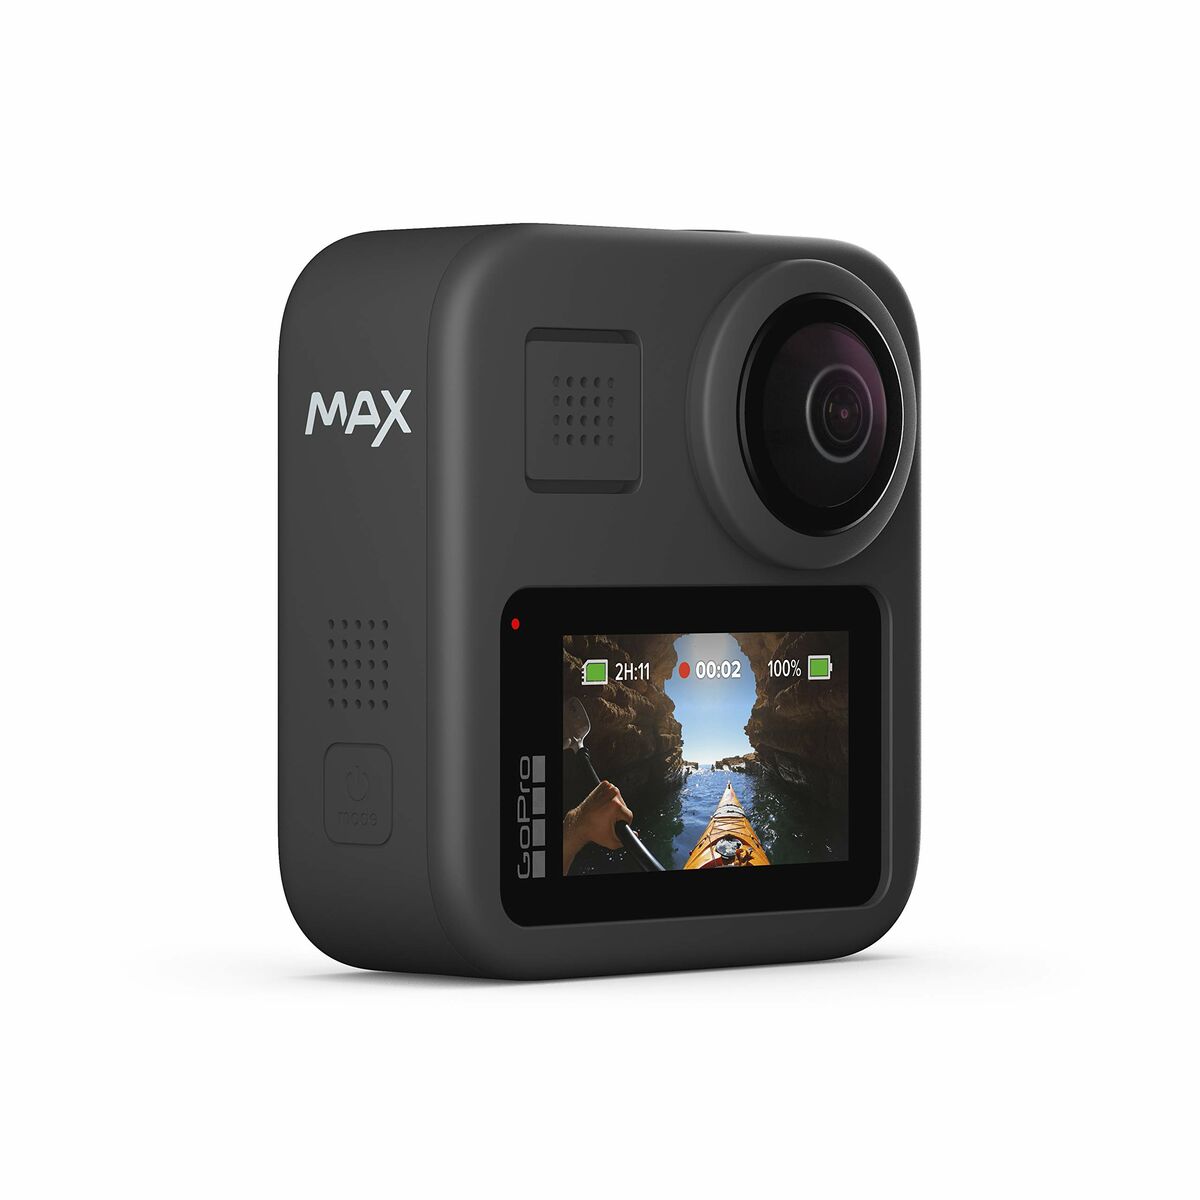 Sports Camera GoPro MAX 360 Black, GoPro, Sports and outdoors, Electronics and devices, sports-camera-gopro-max-360-black, Brand_GoPro, category-reference-2609, category-reference-2614, category-reference-2932, category-reference-t-19756, category-reference-t-7034, category-reference-t-7048, Condition_NEW, deportista / en forma, fotografía, Price_500 - 600, travel, vida sana, RiotNook